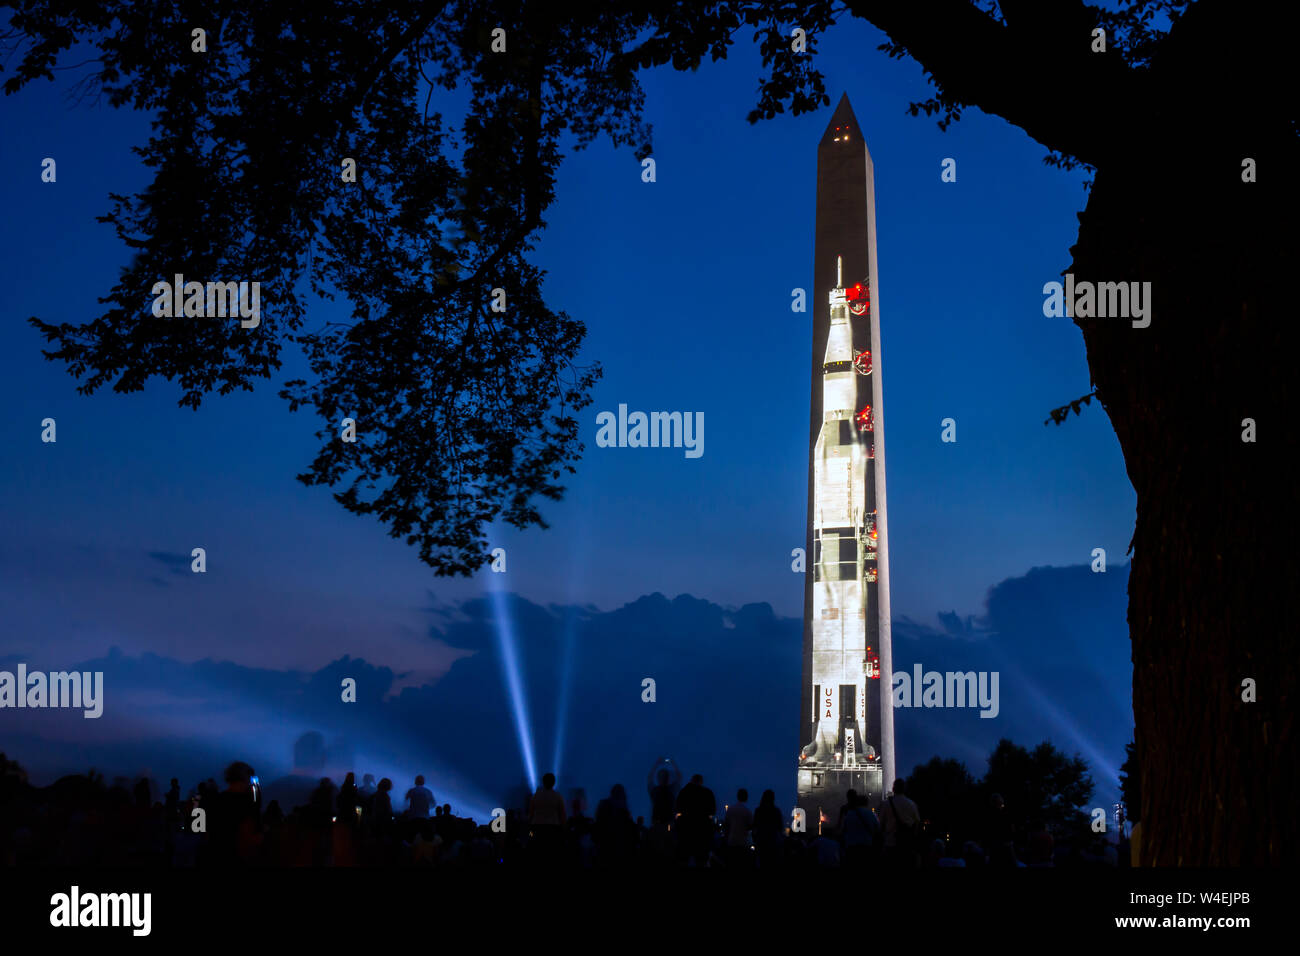 Apollo 11 Saturn V rocket projected onto the Washington Monument at National Mall in commemoration of the lunar landing 50th anniversary 20 July 2019. Stock Photo